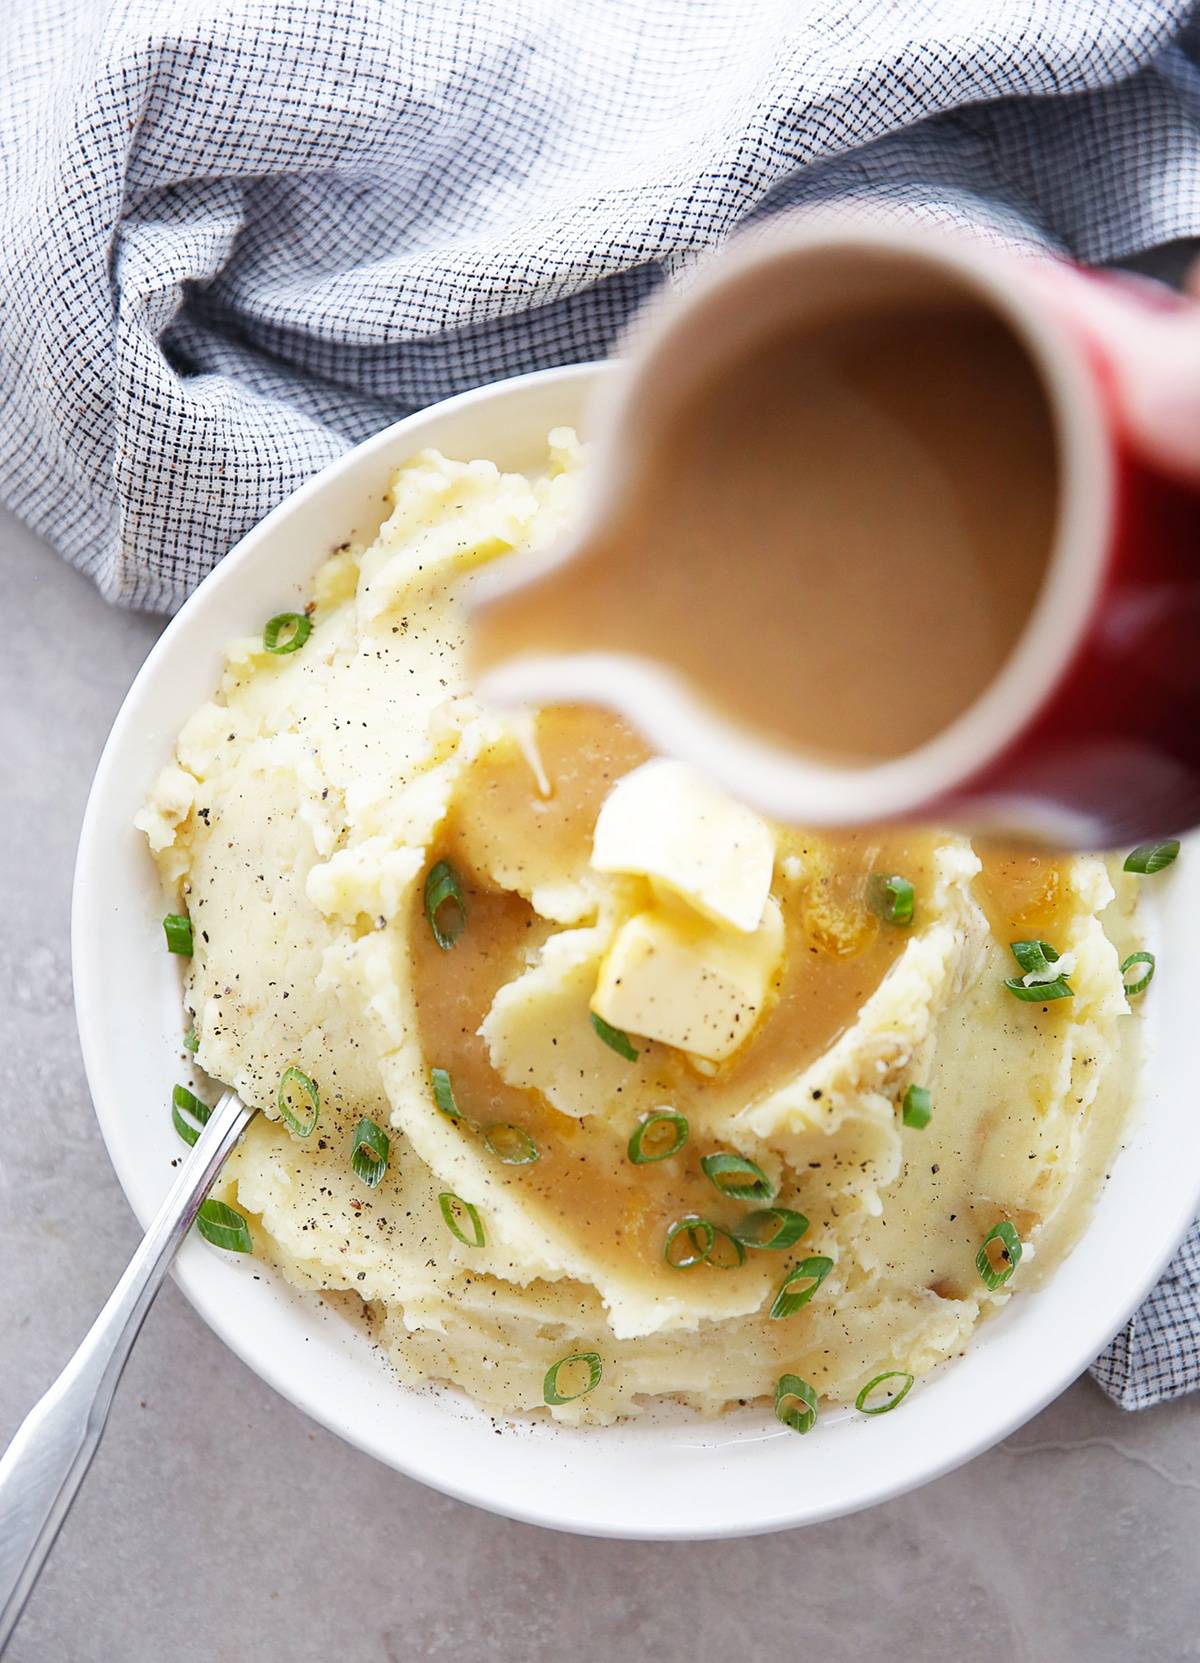 Mashed potatoes made with chicken broth